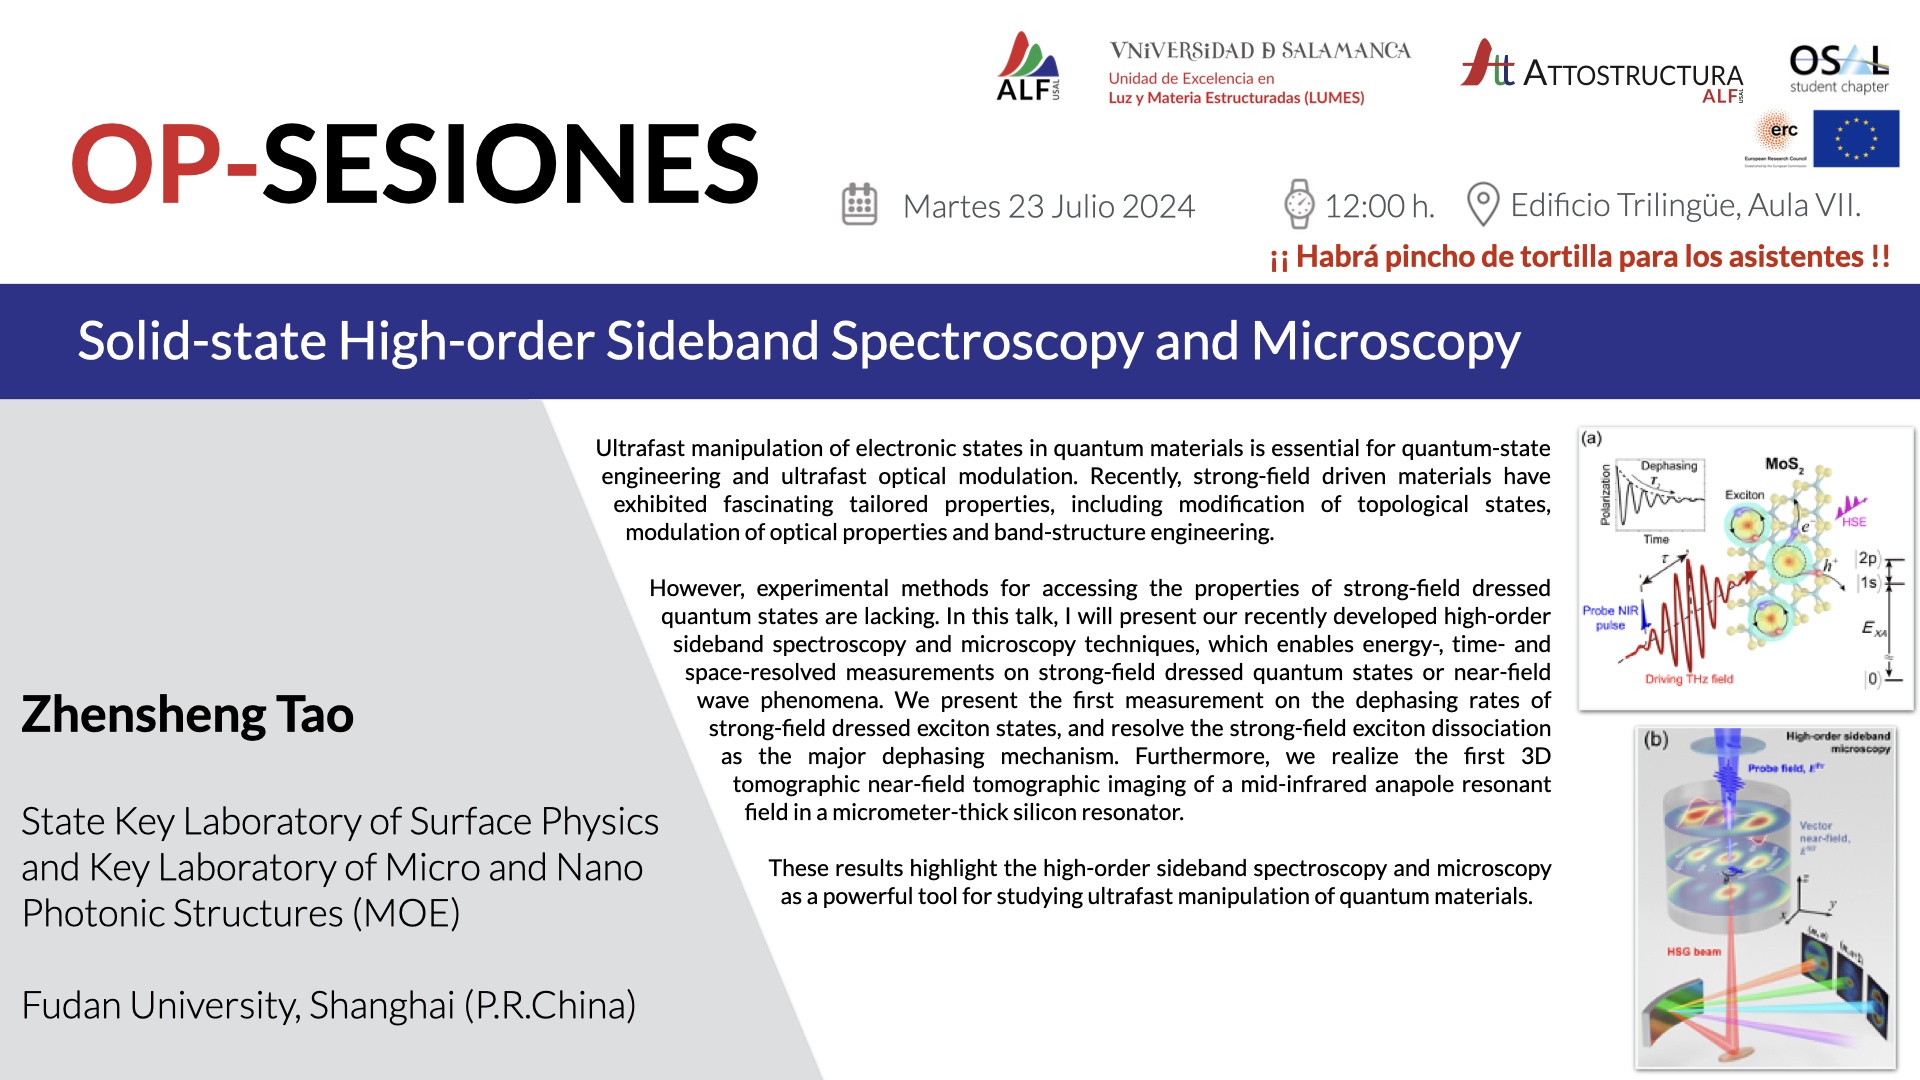 OP SESSION – SOLID-STATE HIGH-ORDER SIDEBAND SPECTROSCOPY AND MICROSCOPY